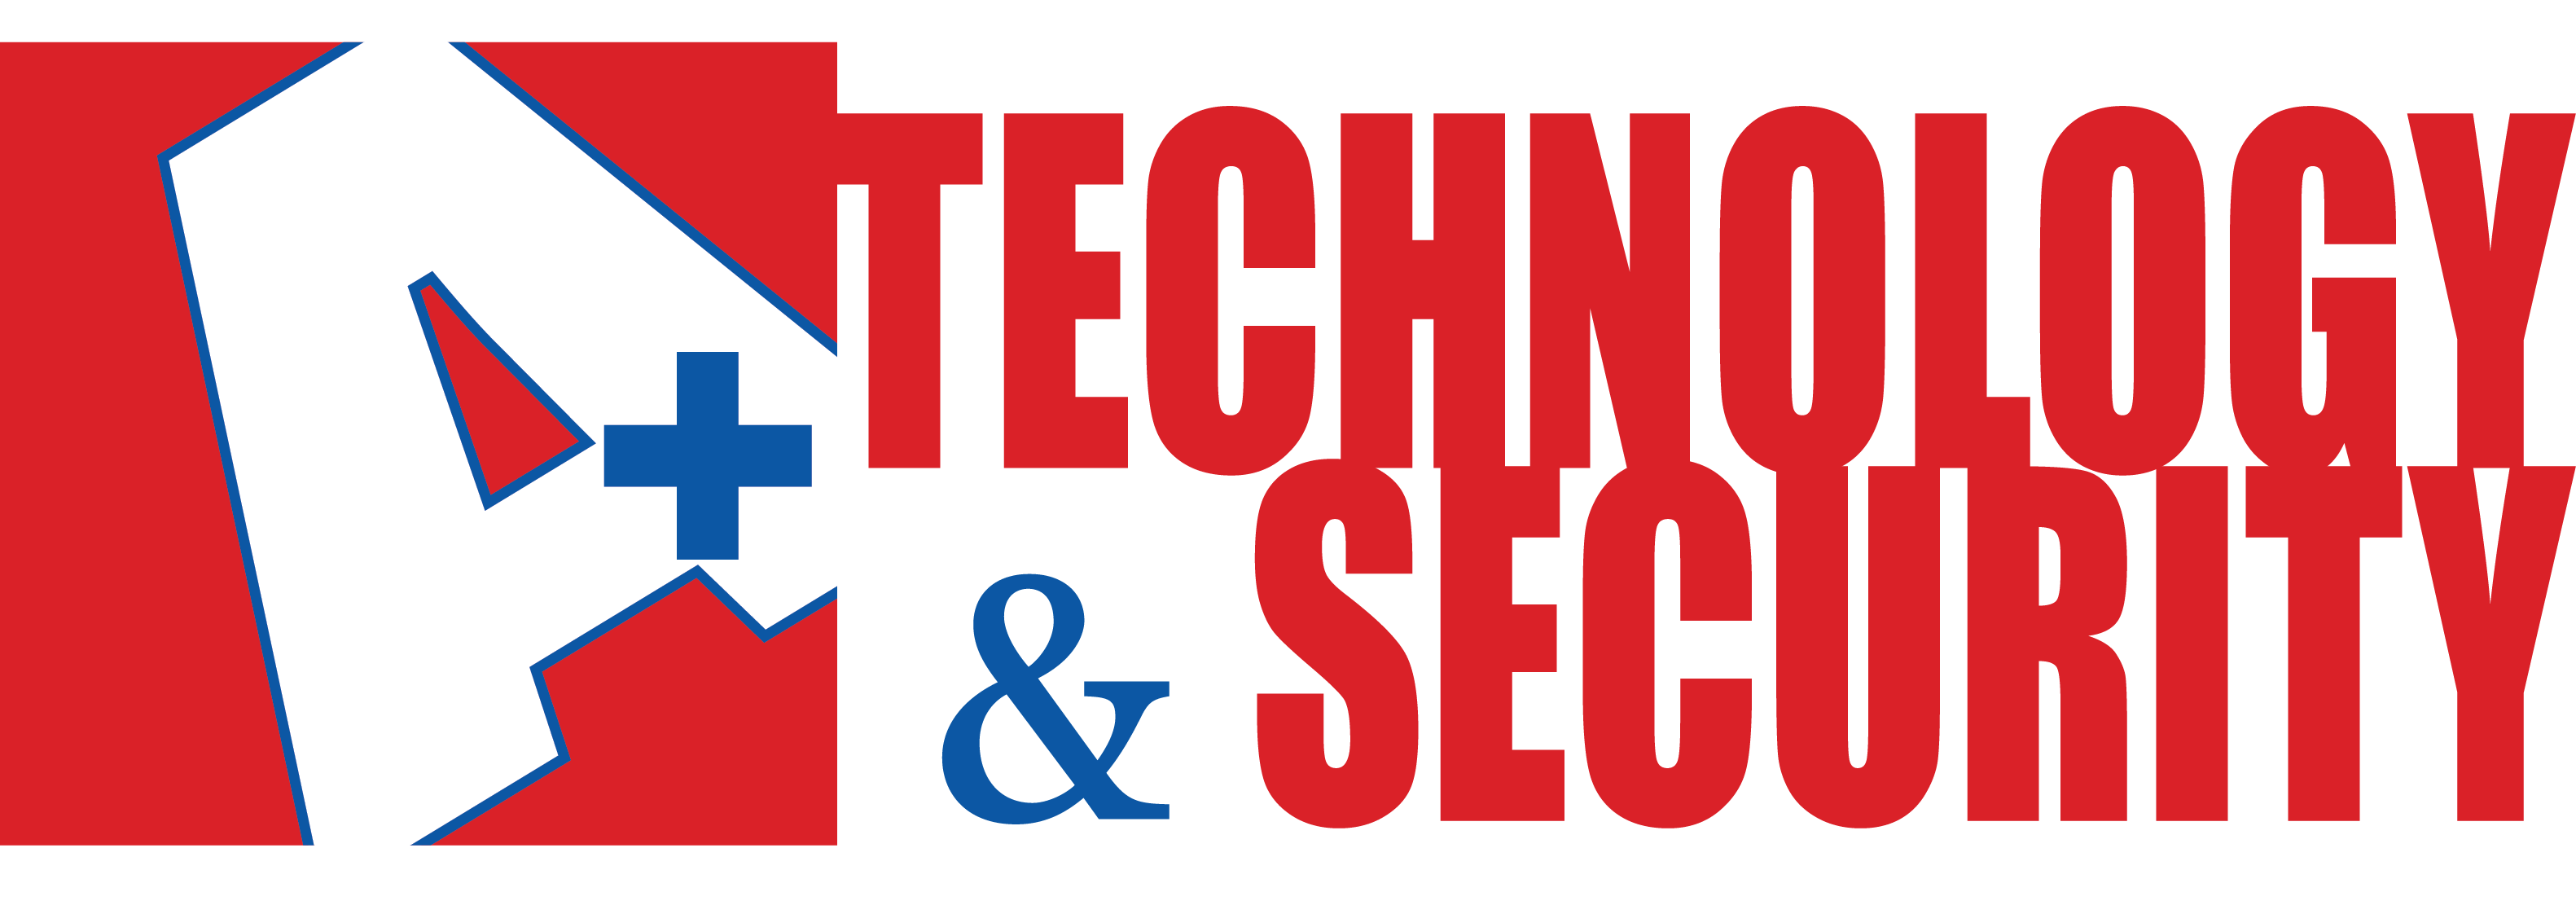 A+ Technology and Security Solutions Inc. Company Logo